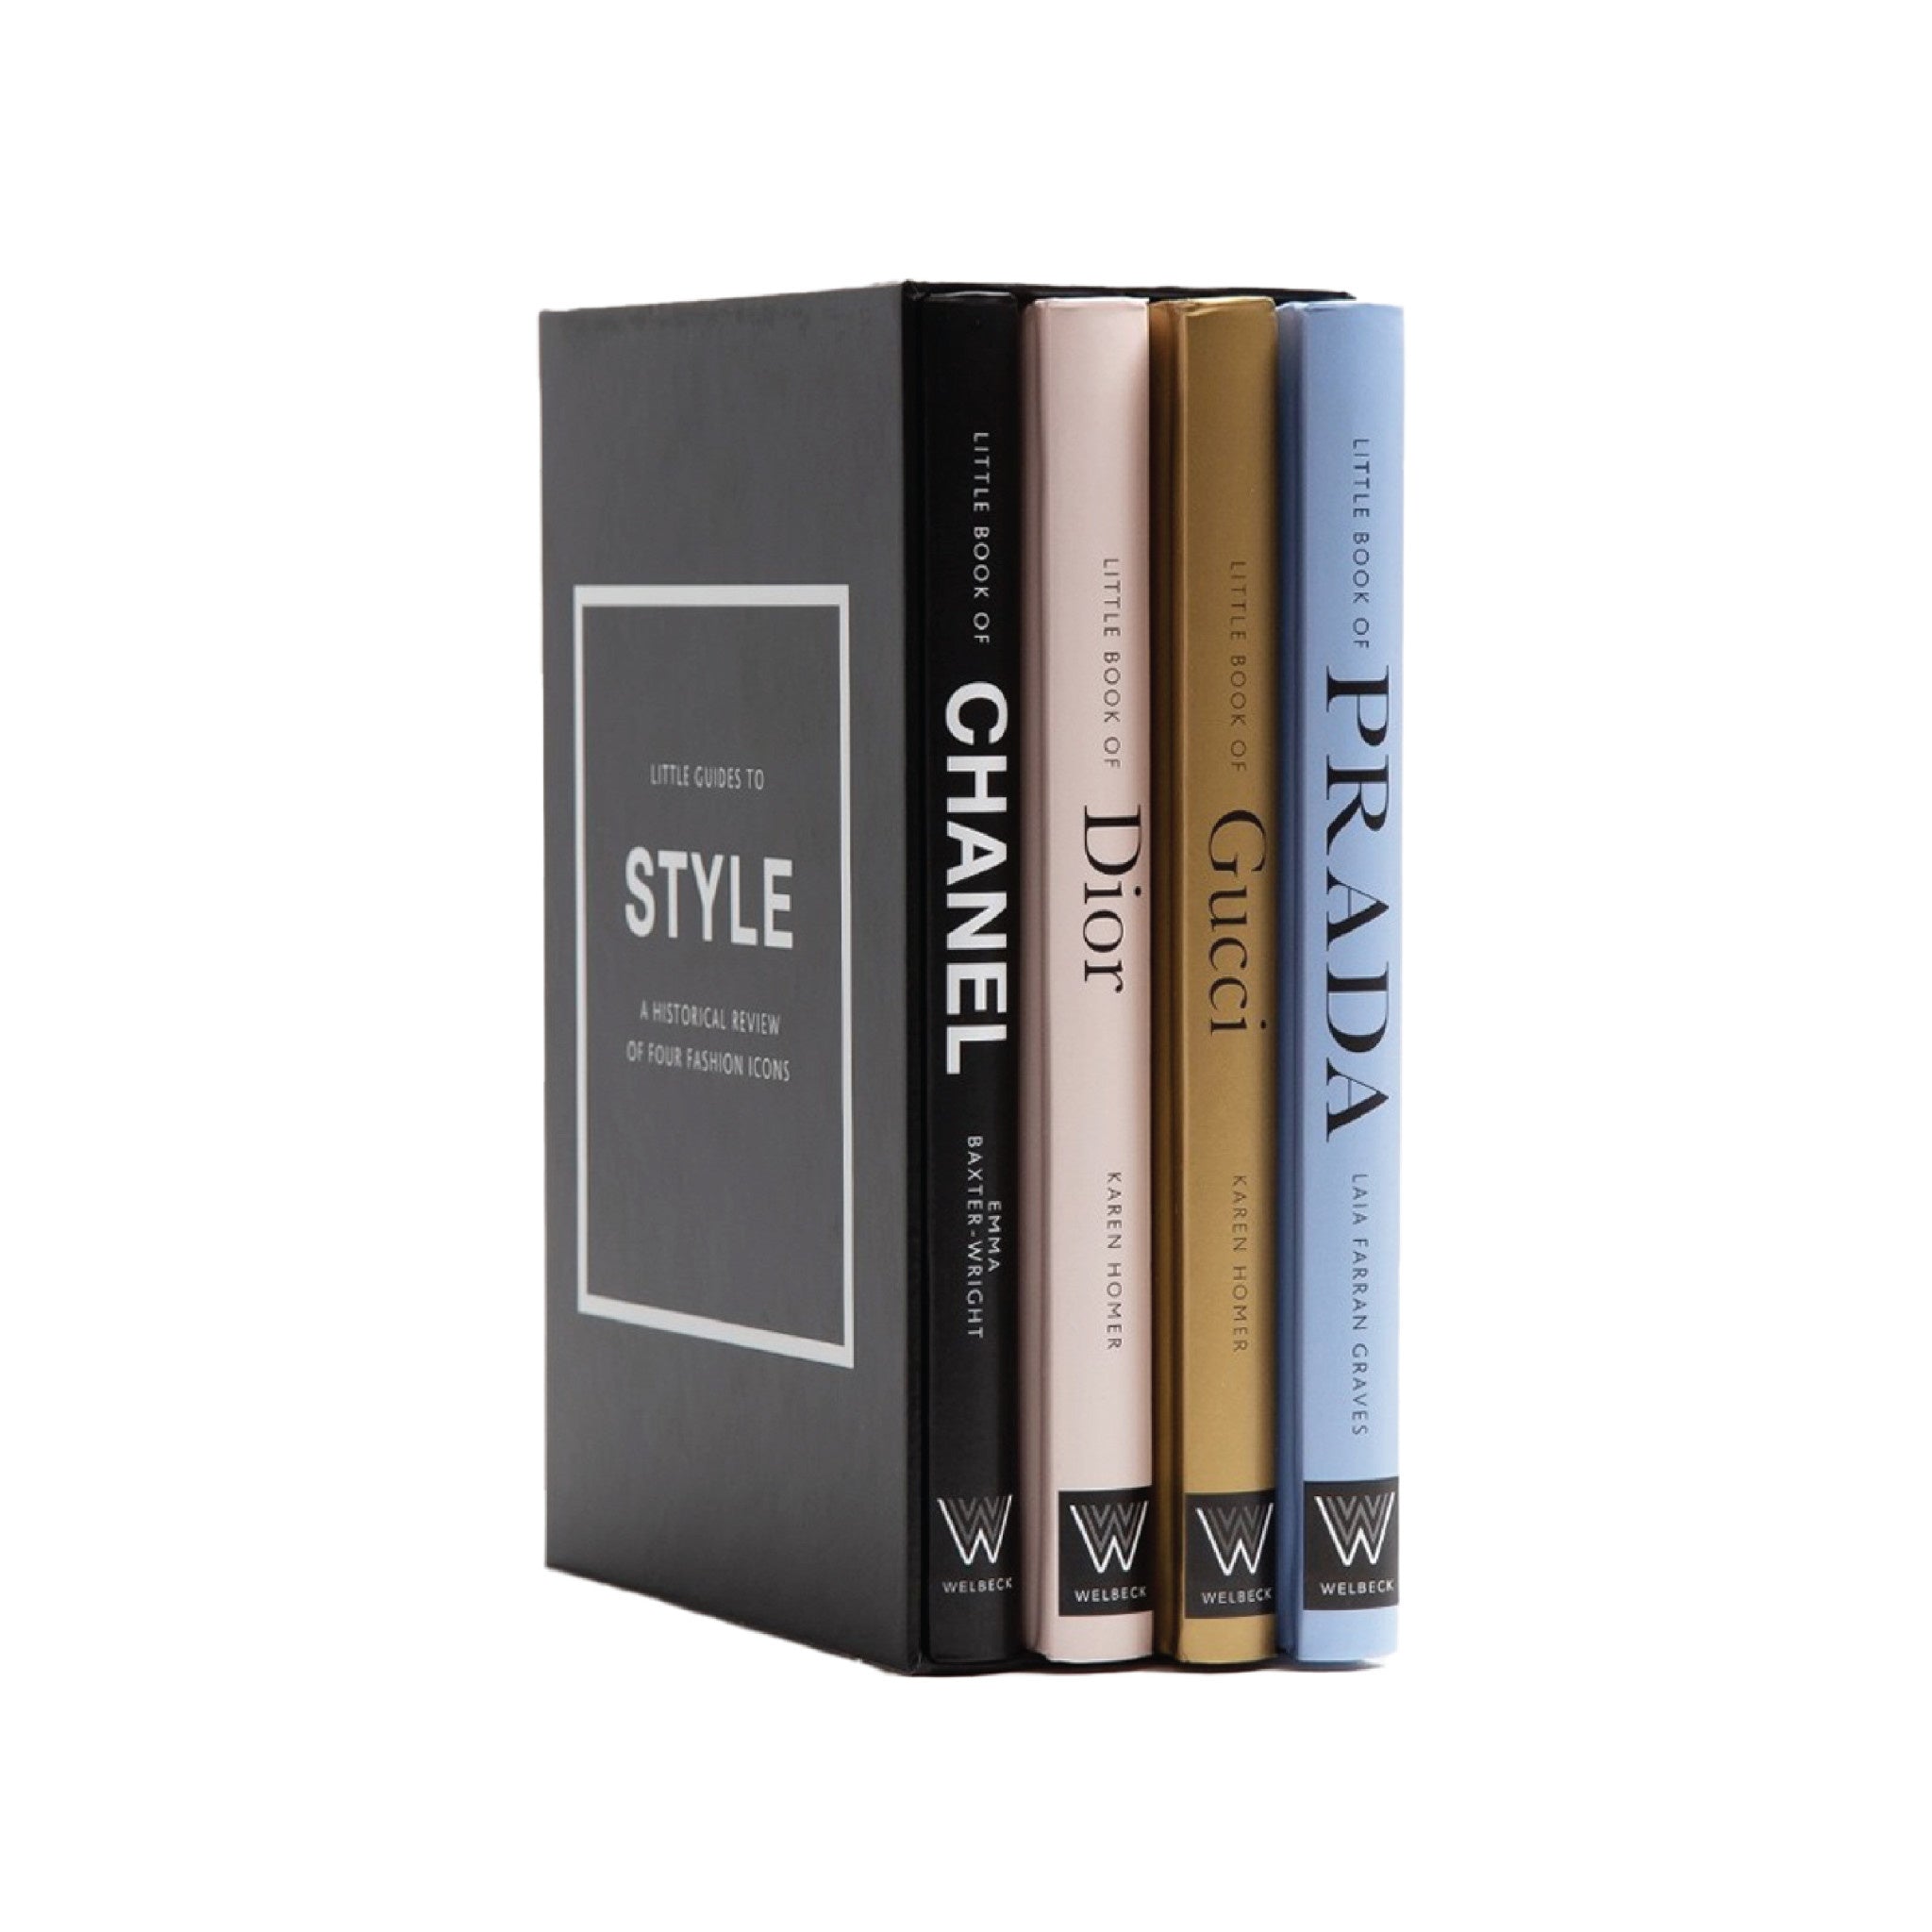 Little Guides to Style: The Story of Four Iconic Fashion Houses - Wynwood Walls Shop